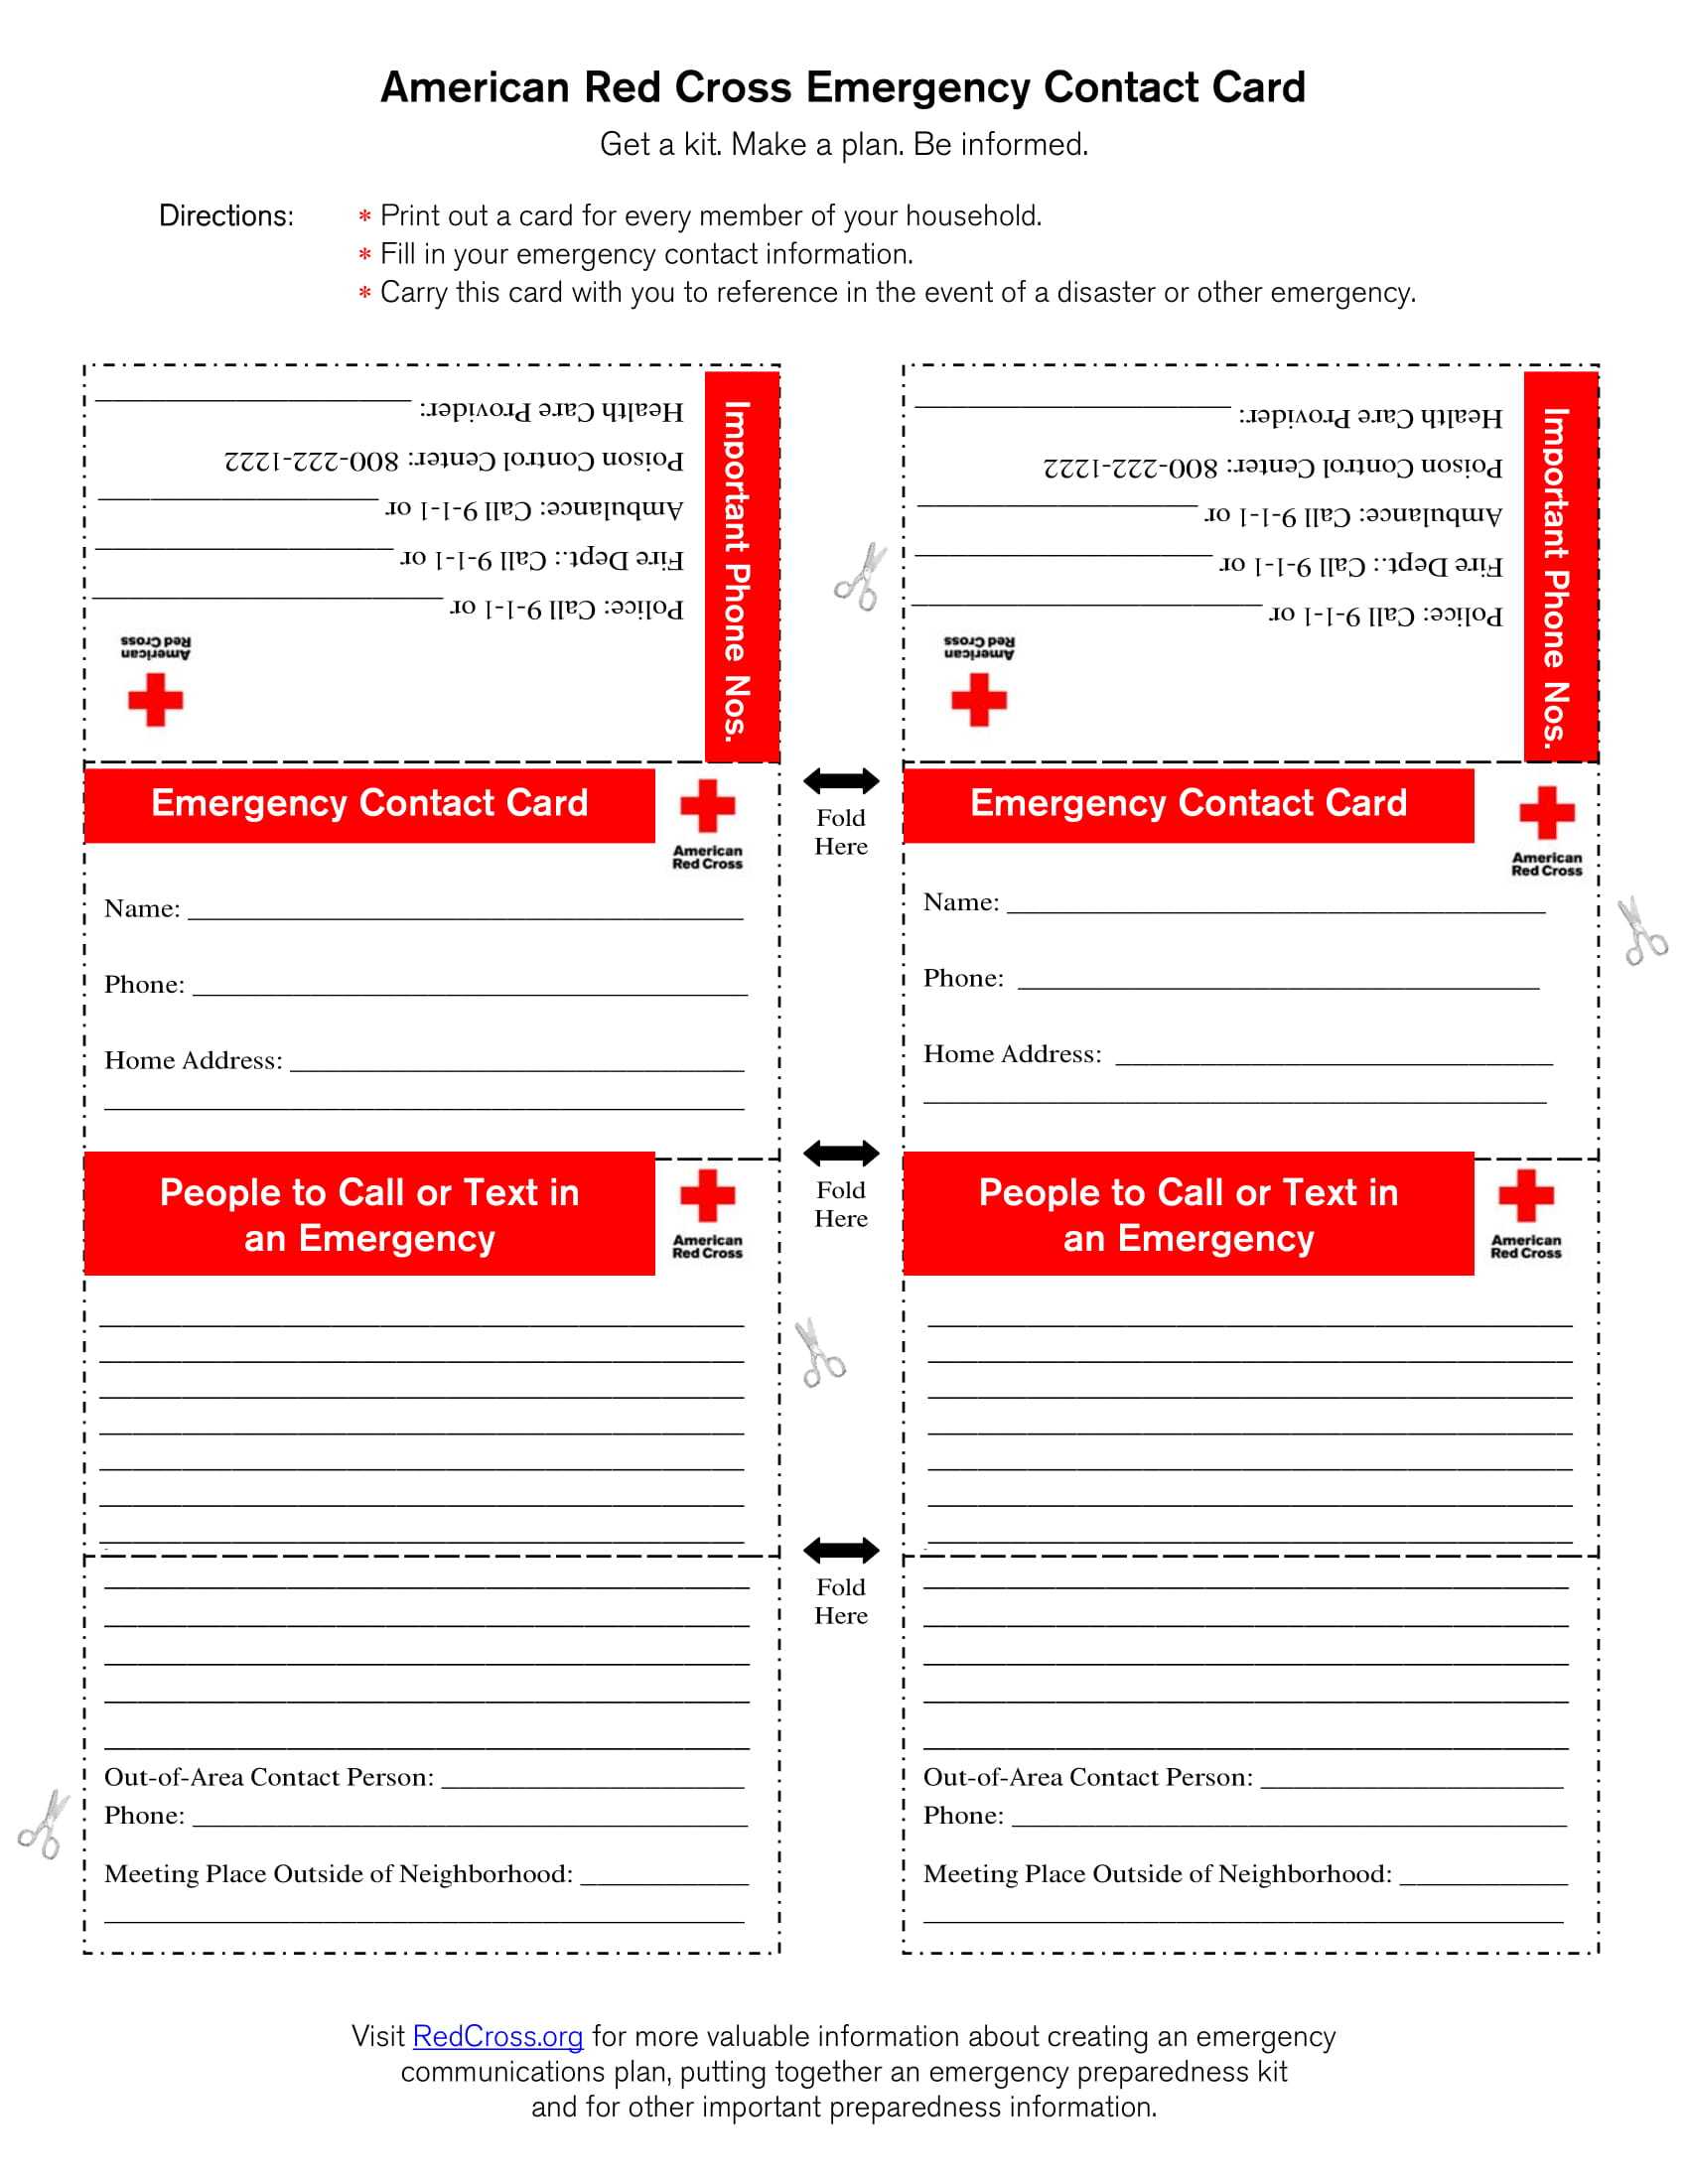 10+ Emergency Information Form Examples - Pdf | Examples Within Emergency Contact Card Template